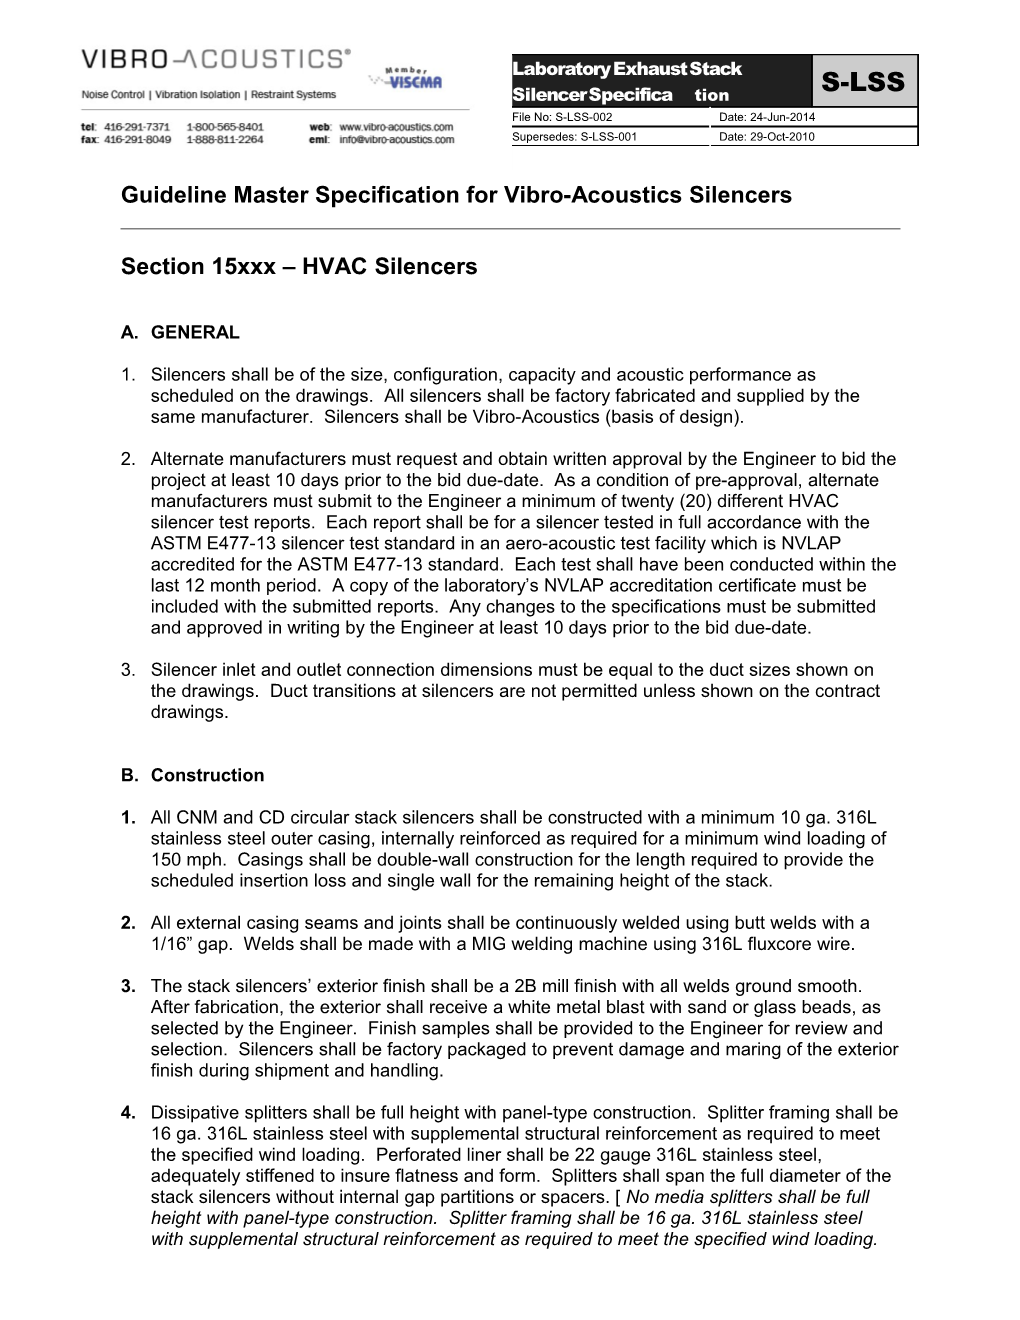 Guideline Master Specification for Vibro-Acoustics Silencers